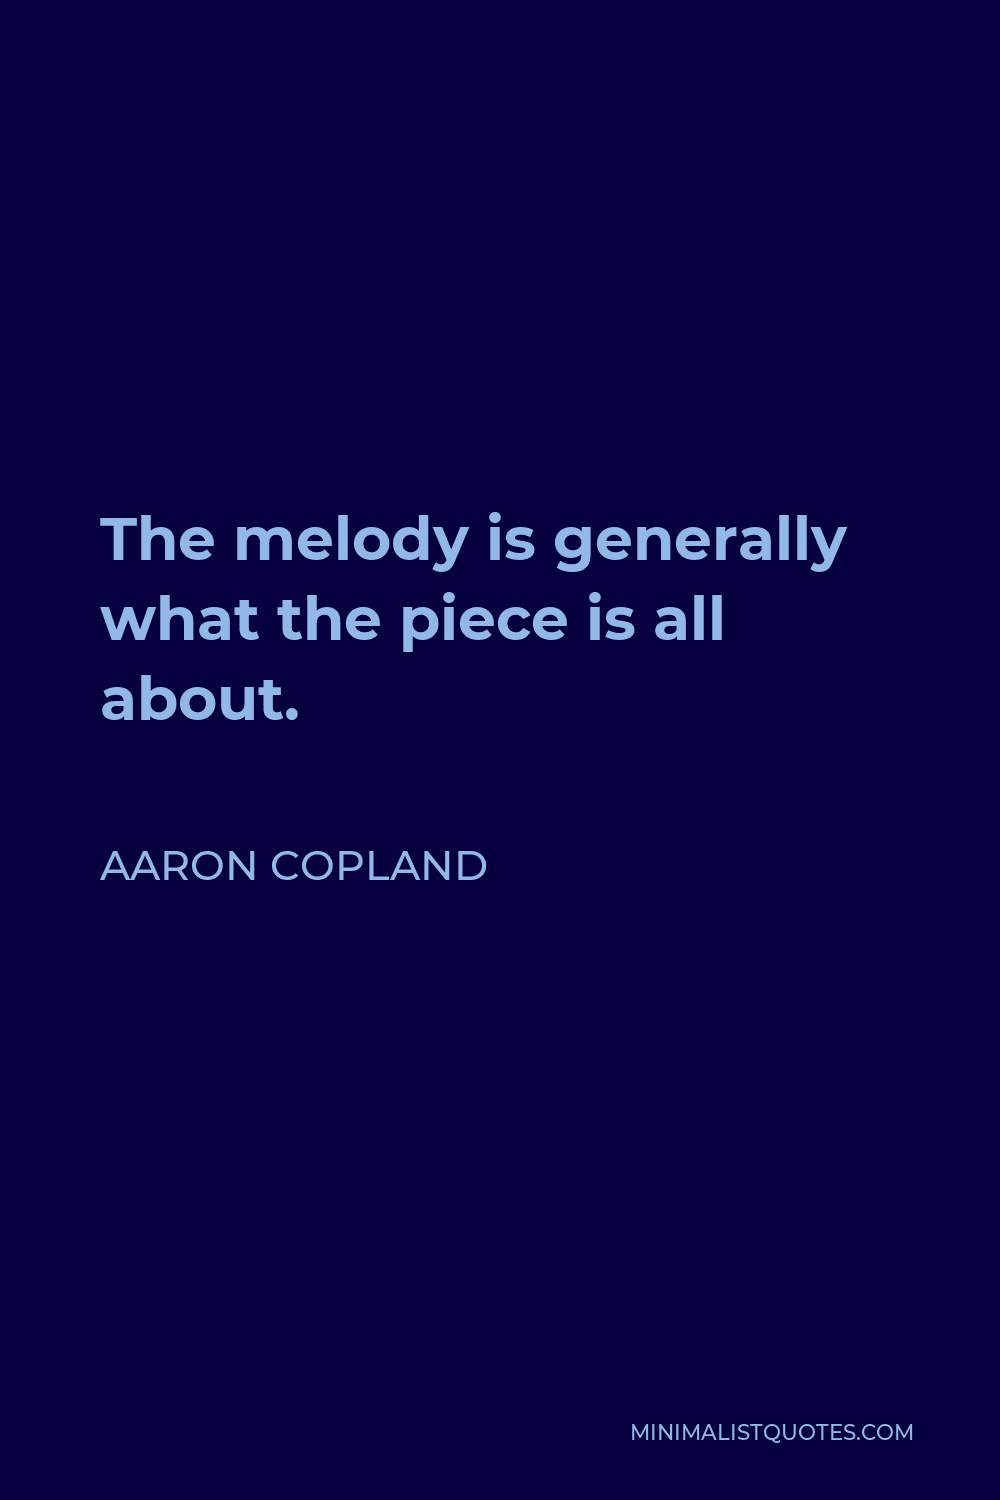 Aaron Copland Quote - The melody is generally what the piece is all about.